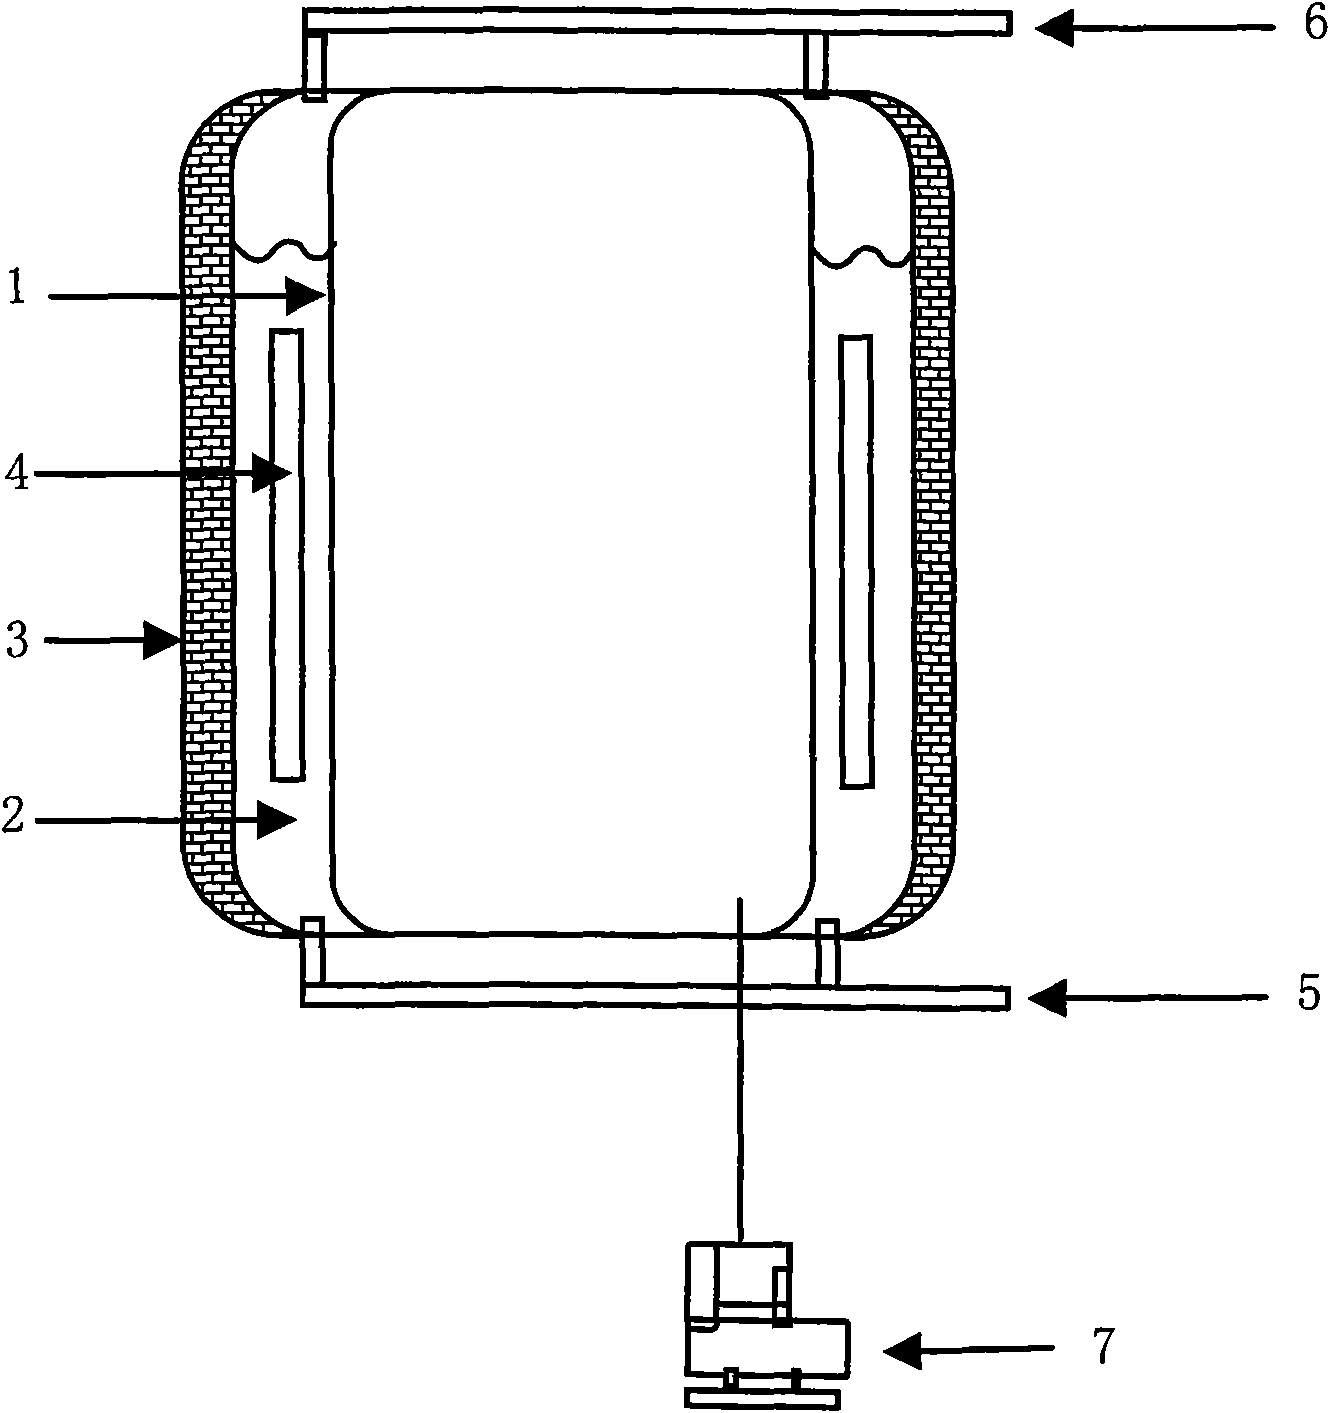 Method and processing system for comprehensively recycling municipal solid wastes